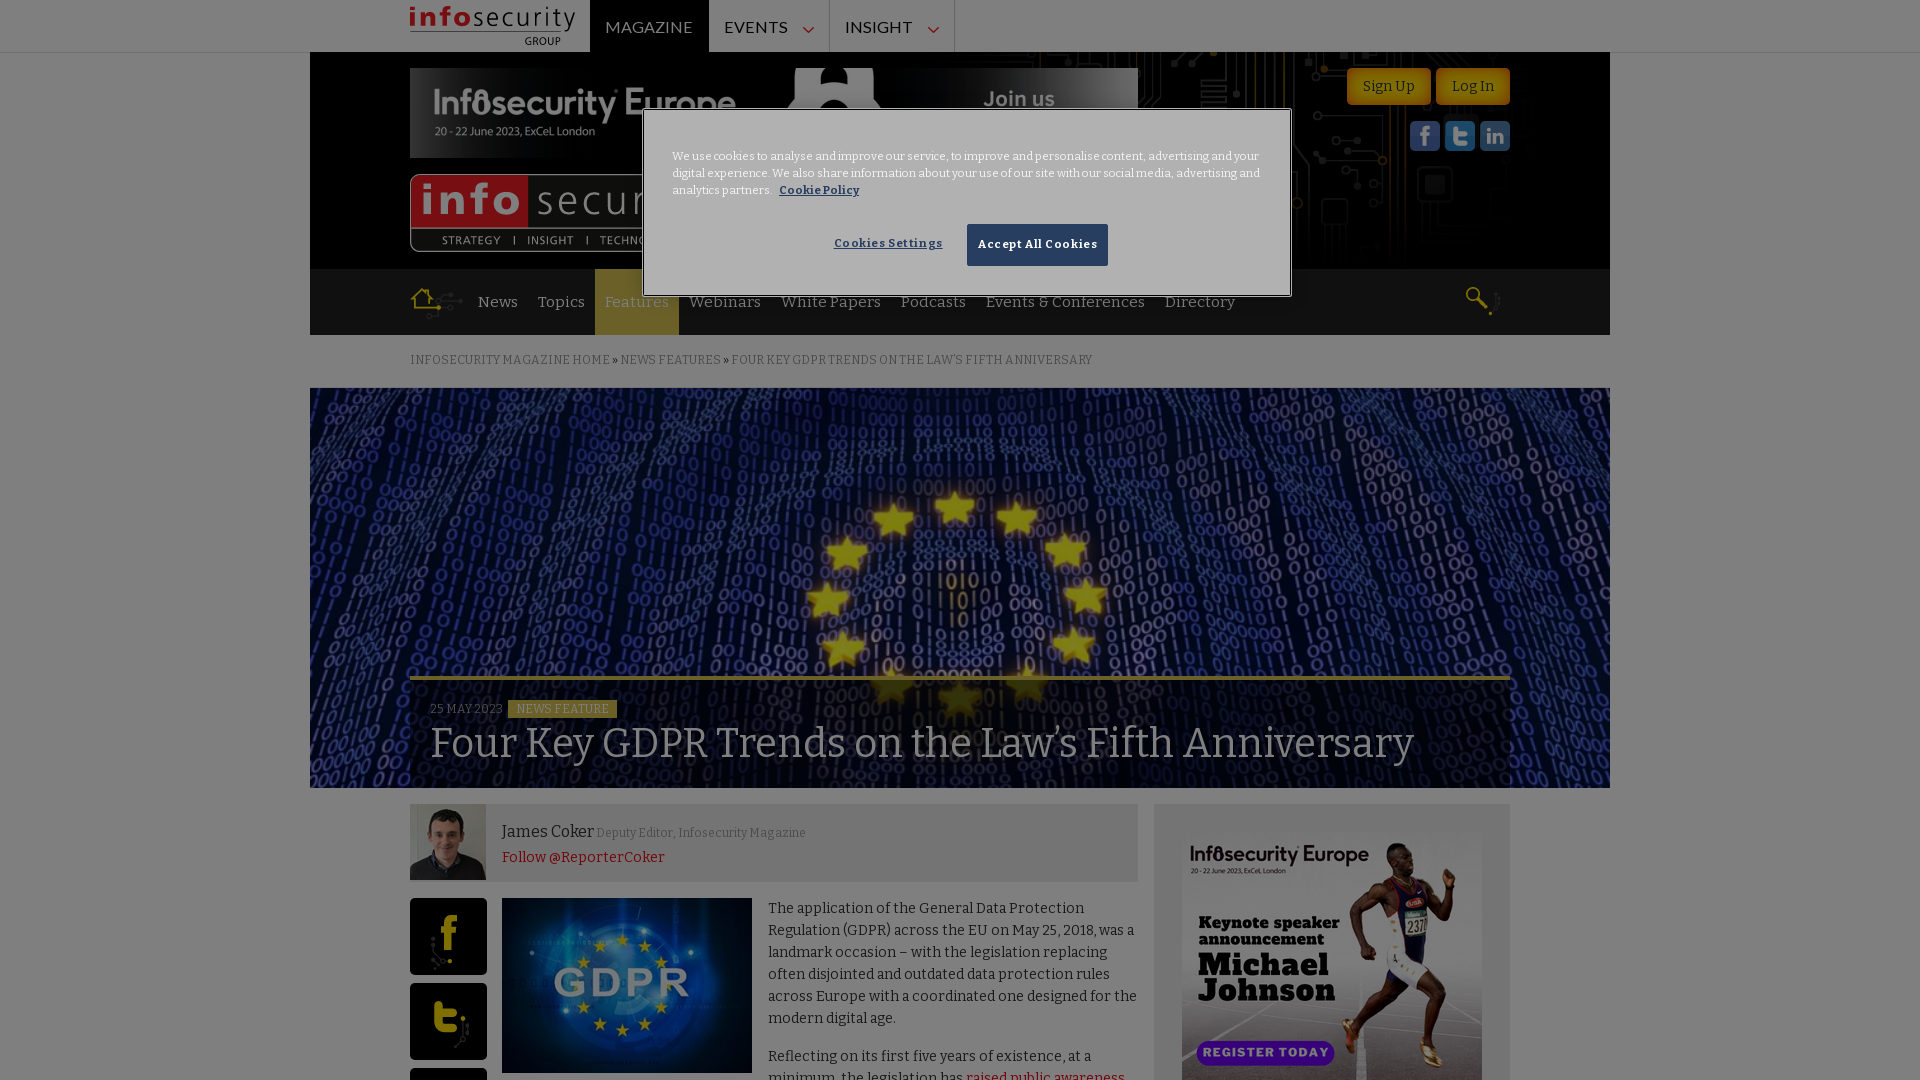 Four Key GDPR Trends on the Law’s Fifth Anniversary - Infosecurity Magazine